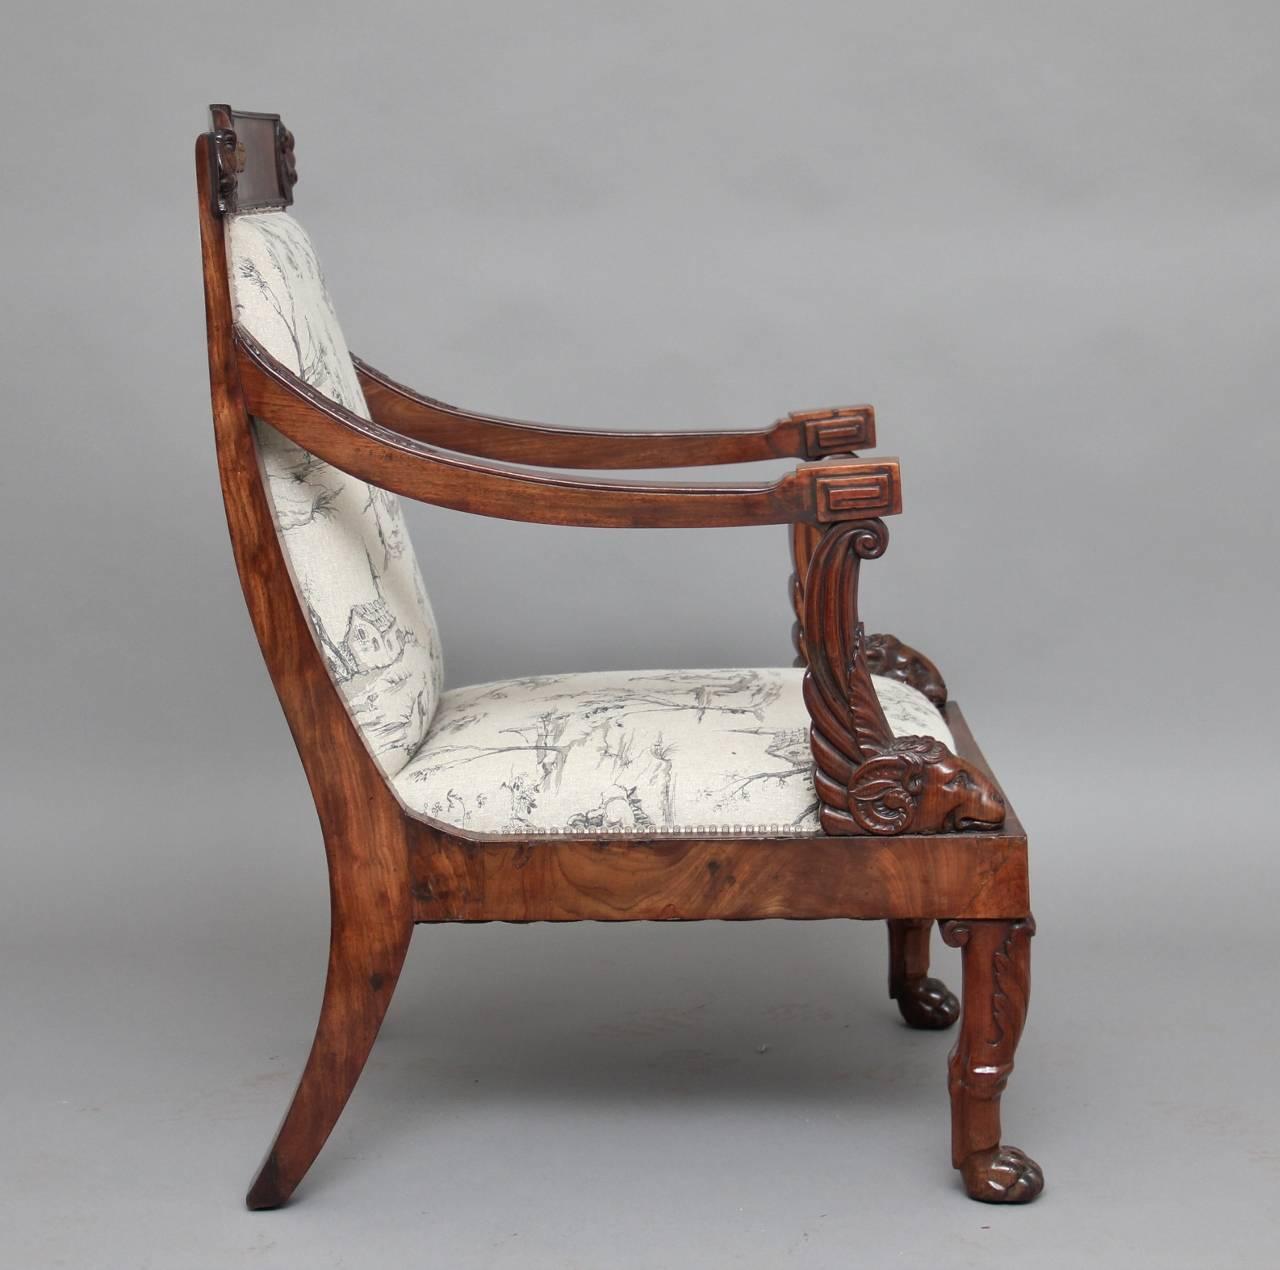 A lovely 19th century Regency mahogany open armchair, this well carved chair starts off with lions heads on the top curved rail, the shaped arms have acanthus leaf decoration and terminates with rams heads and the carved front legs ends in lions paw